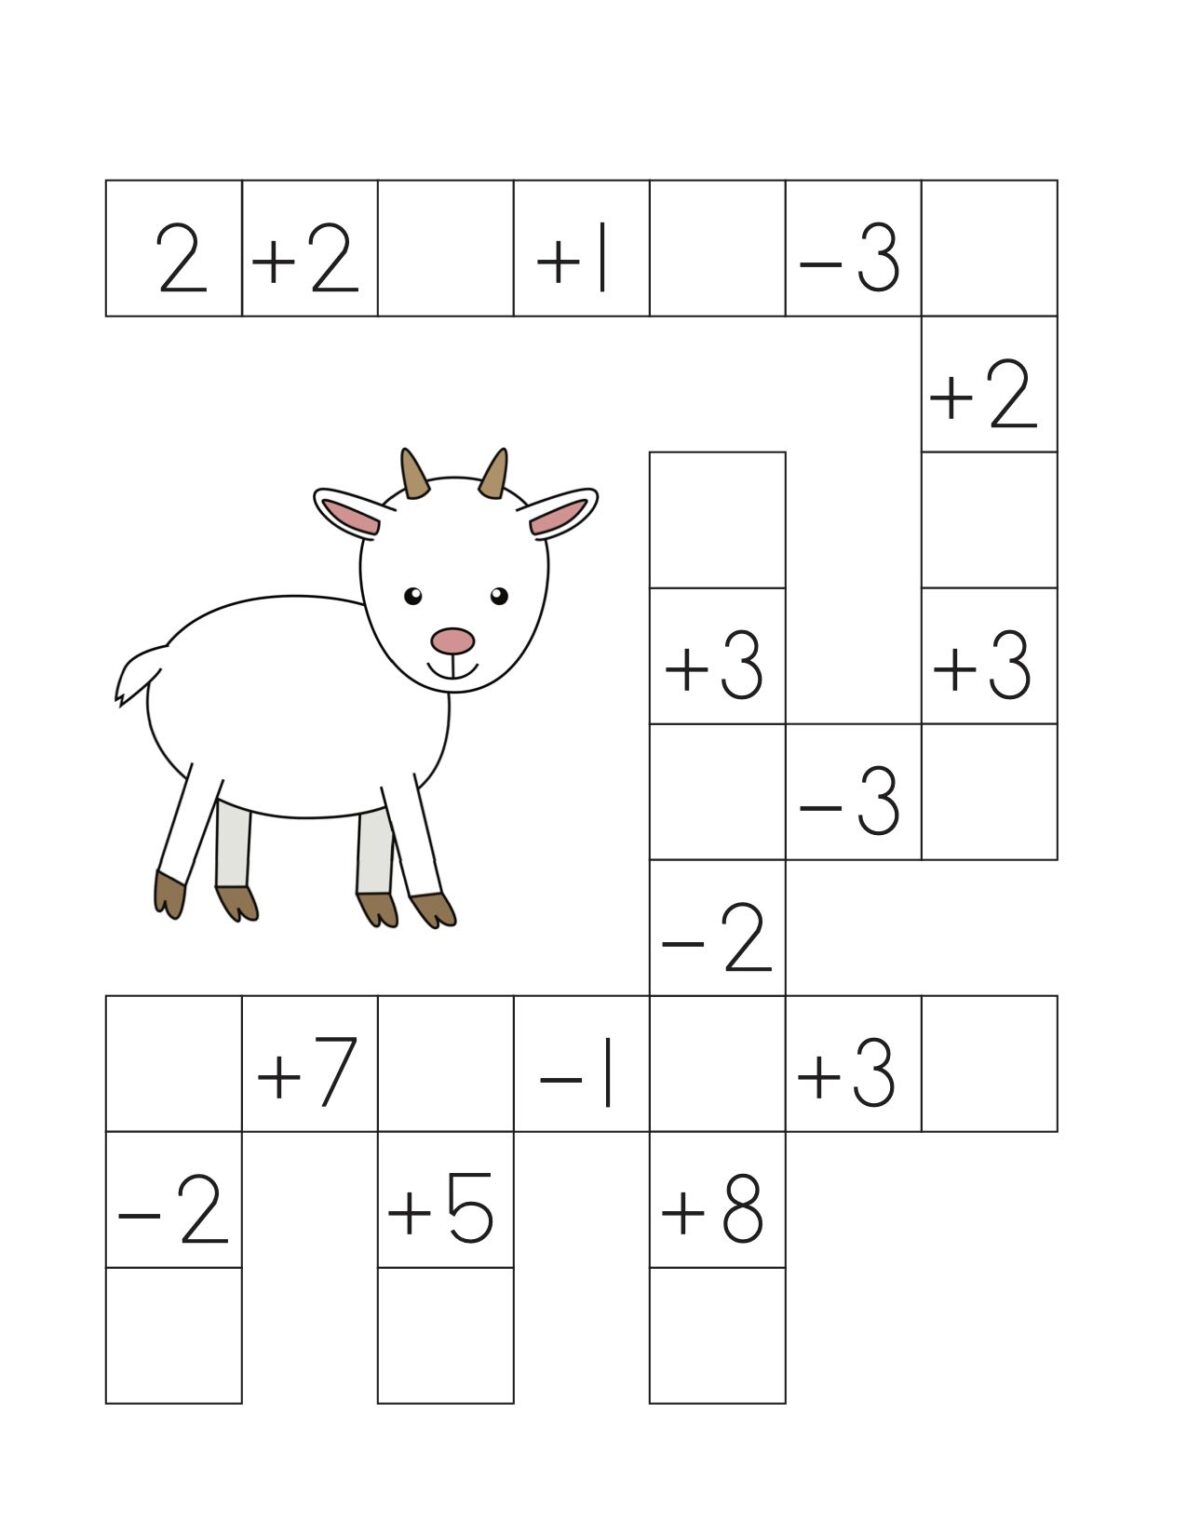 farm-math-puzzles-addition-and-subtraction-worksheets-easy-peasy-learners